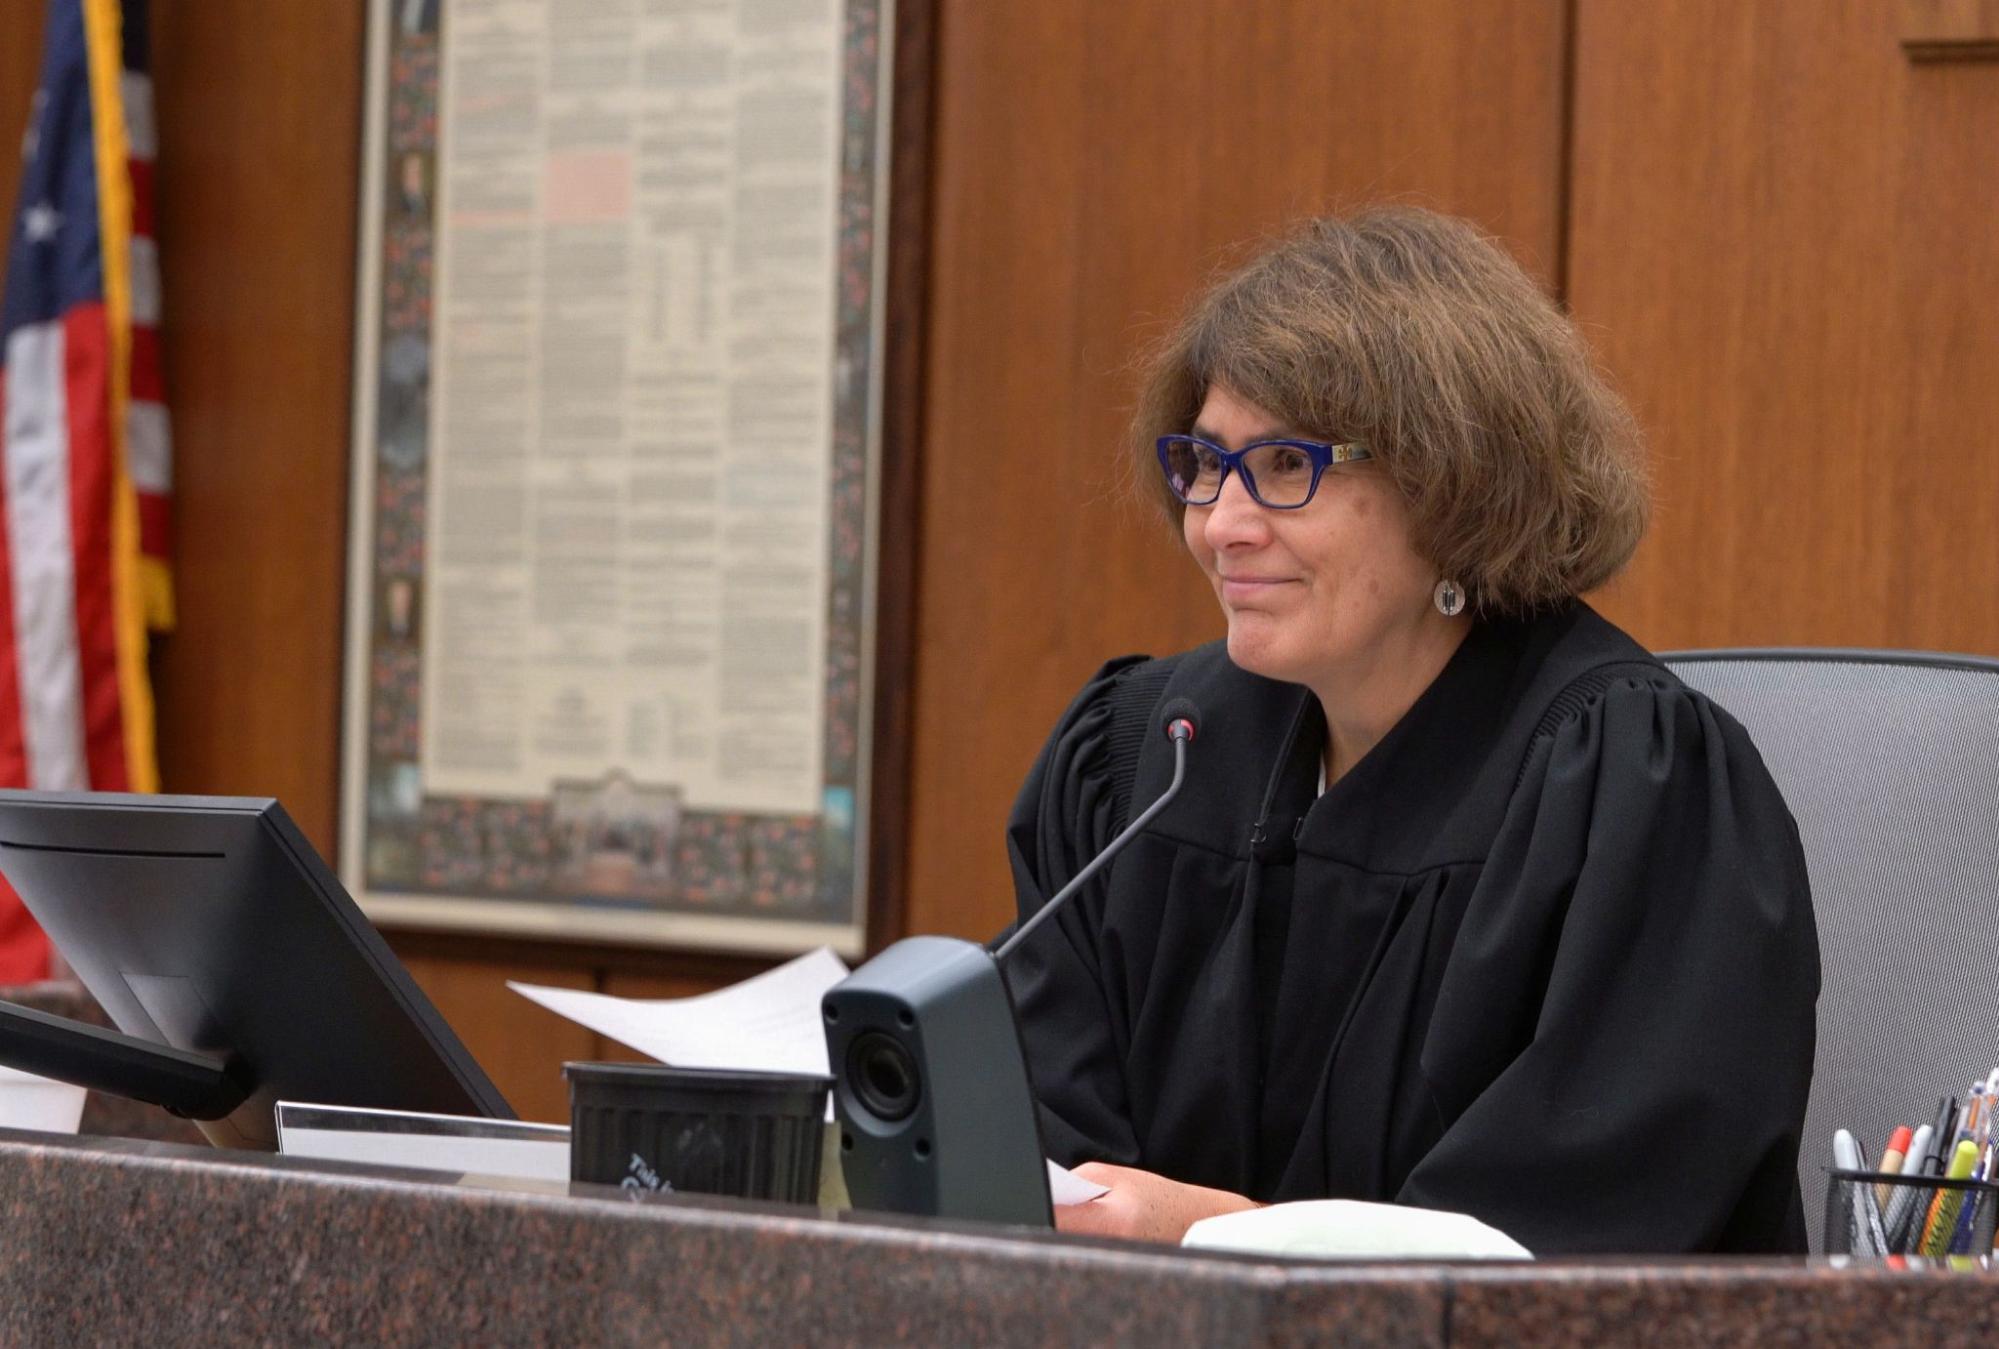 Judge Reding is smiling and has blue glasses, earrings, and brown hair.